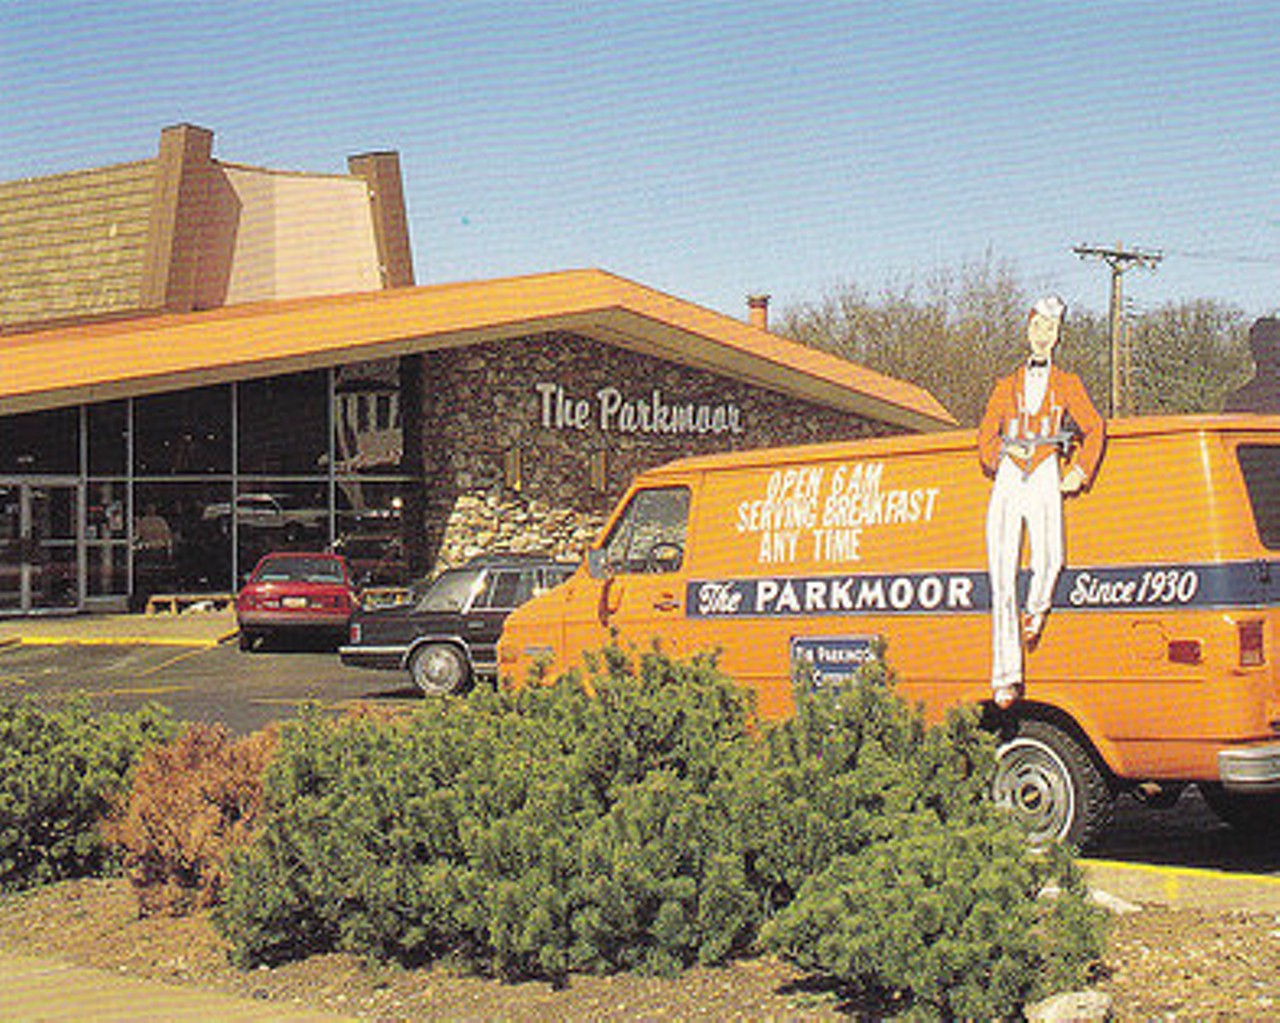 Parkmoor
6733 Clayton Rd.
Opened in 1931, this old-style curb-service restaurant eventually turned into the most beloved eat-in diner in all of St. Louis. From service right at your car to a drive-up to a dine-in, the Parkmoor always changed with the times and customers followed. It eventually fell prey to chain restaurants, though, and closed in 1999. Sadly, the entire building was eventually demolished to make space for a Walgreens.
Photo courtesy of Facebook